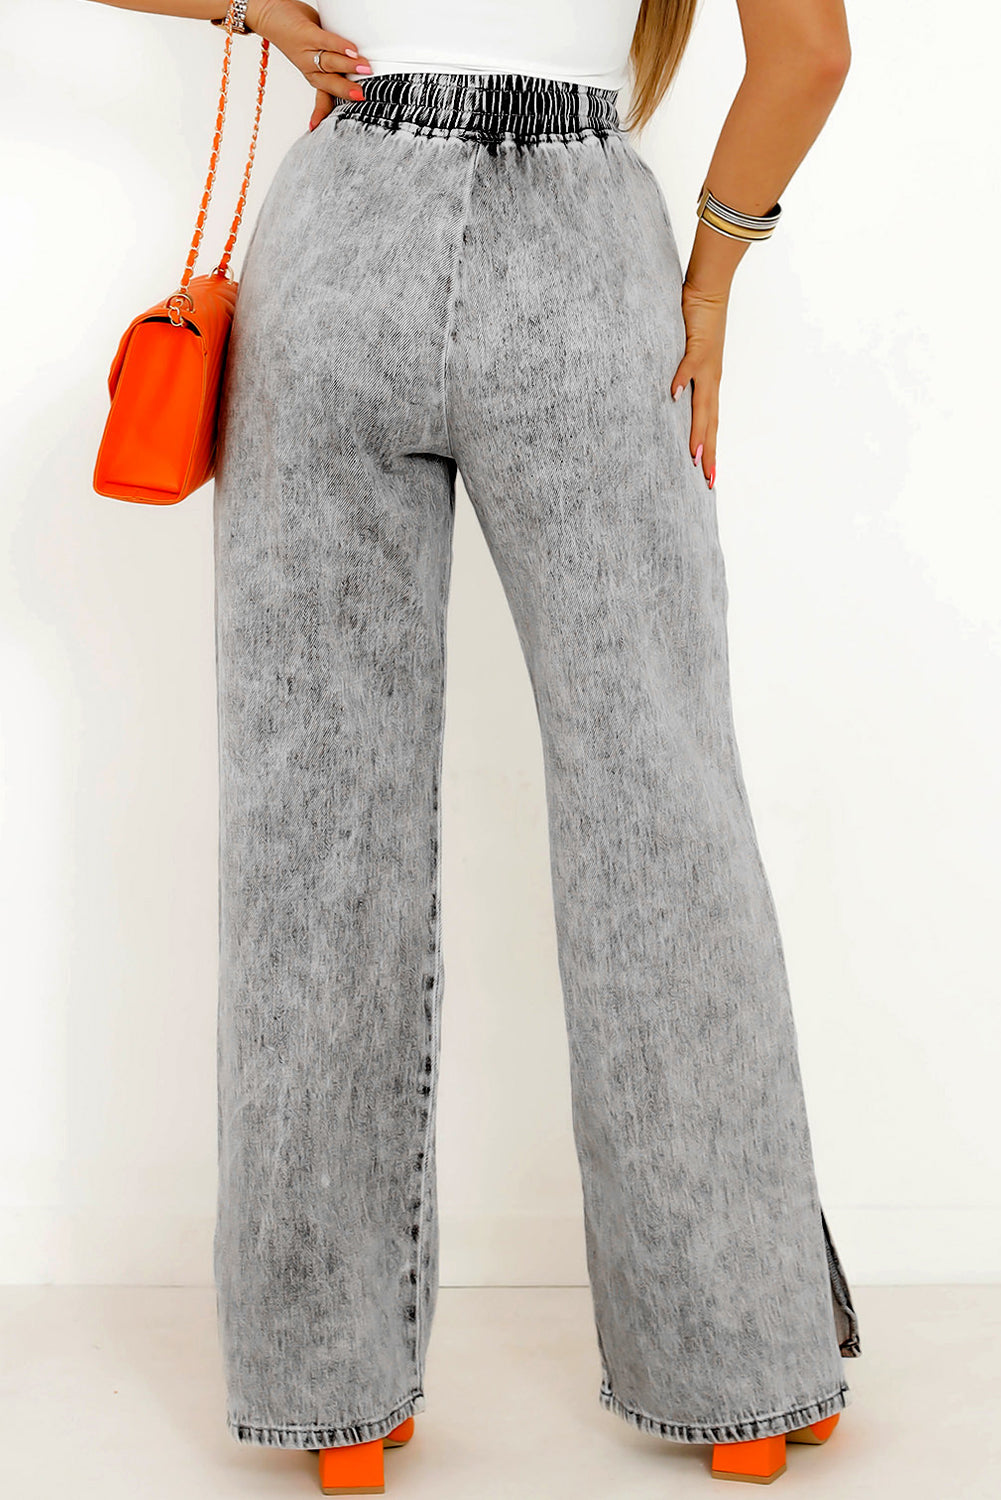 A stylish pair of grey drawstring waist denim pants from a cotton blend fabric, designed with a wide leg for a relaxed yet flattering fit. Perfect for laid-back days!